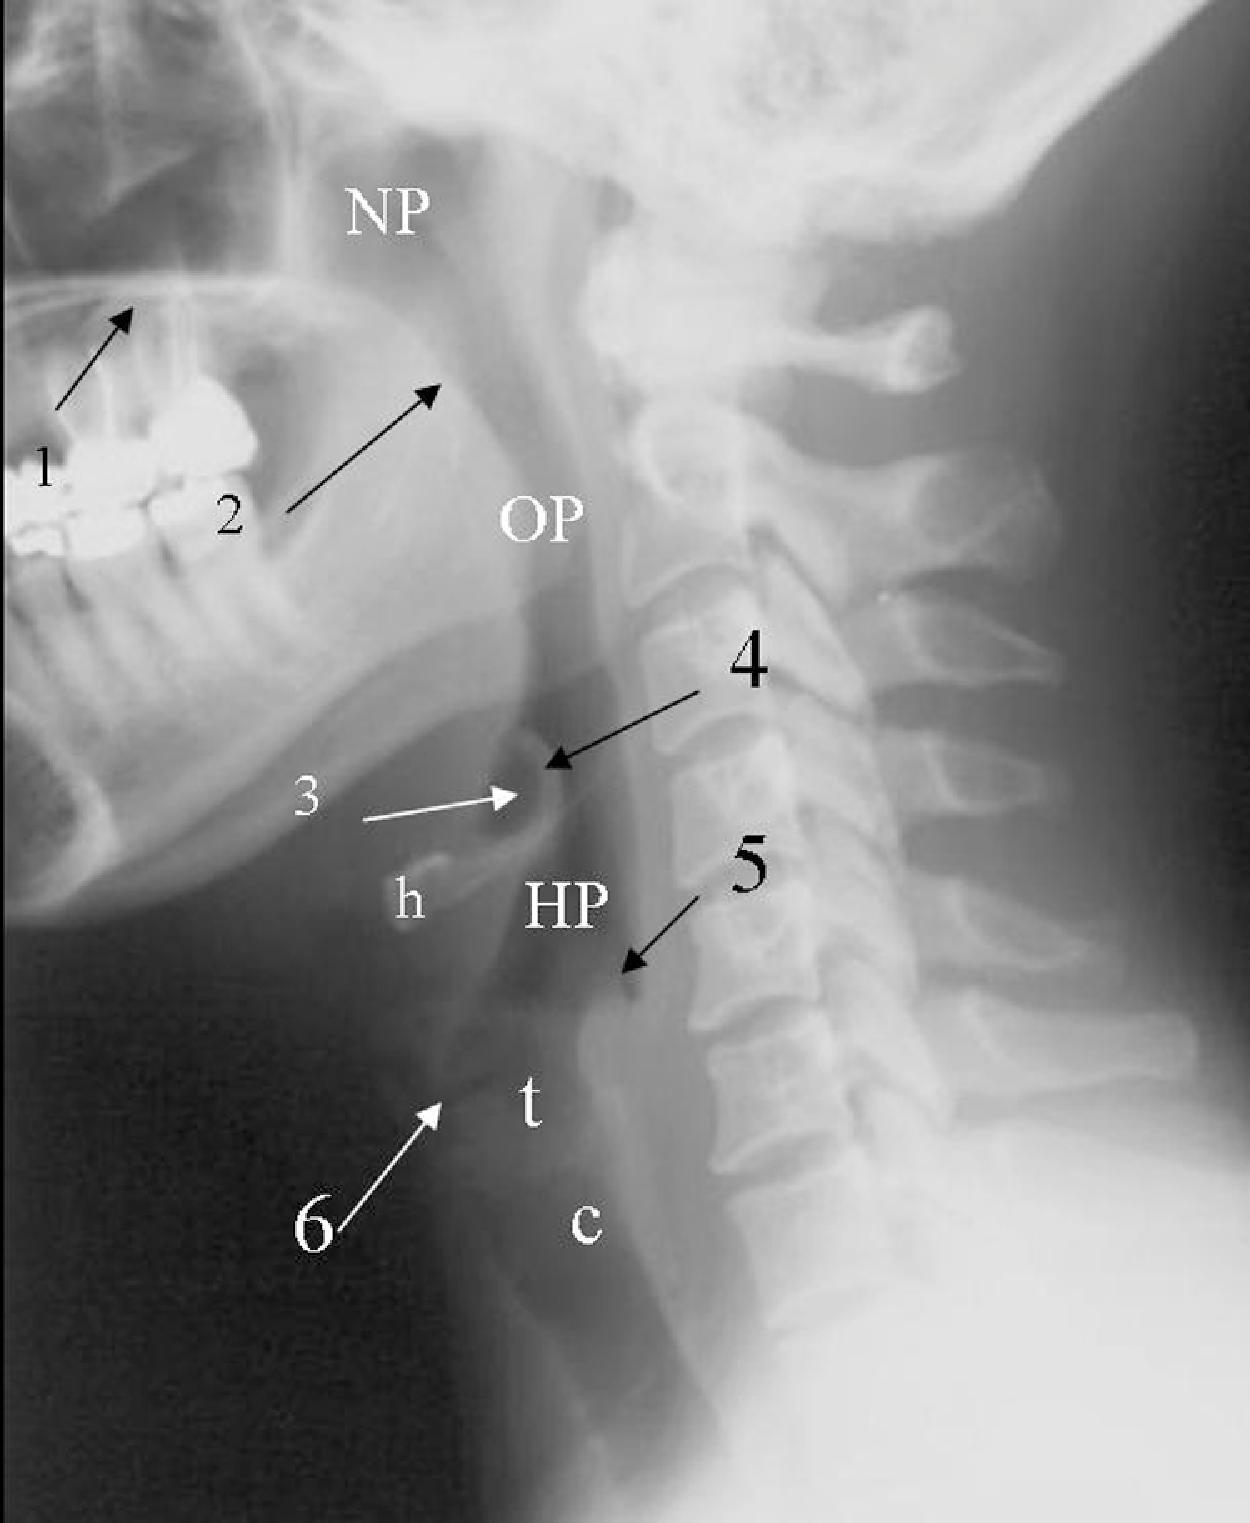 Fig. 2.18, Normal airway structures on a lateral cervical spine radiograph. 1 , Hard palate; 2 , soft palate and uvula; 3 , air-filled vallecula; 4 , epiglottis; 5 , air-filled pyriform sinus; 6 , air-filled stripe laryngeal ventricle; NP , nasopharynx; OP , oropharynx; HP , hypopharynx; h , hyoid bone; t , thyroid cartilage; c , noncalcified cricoid cartilage.